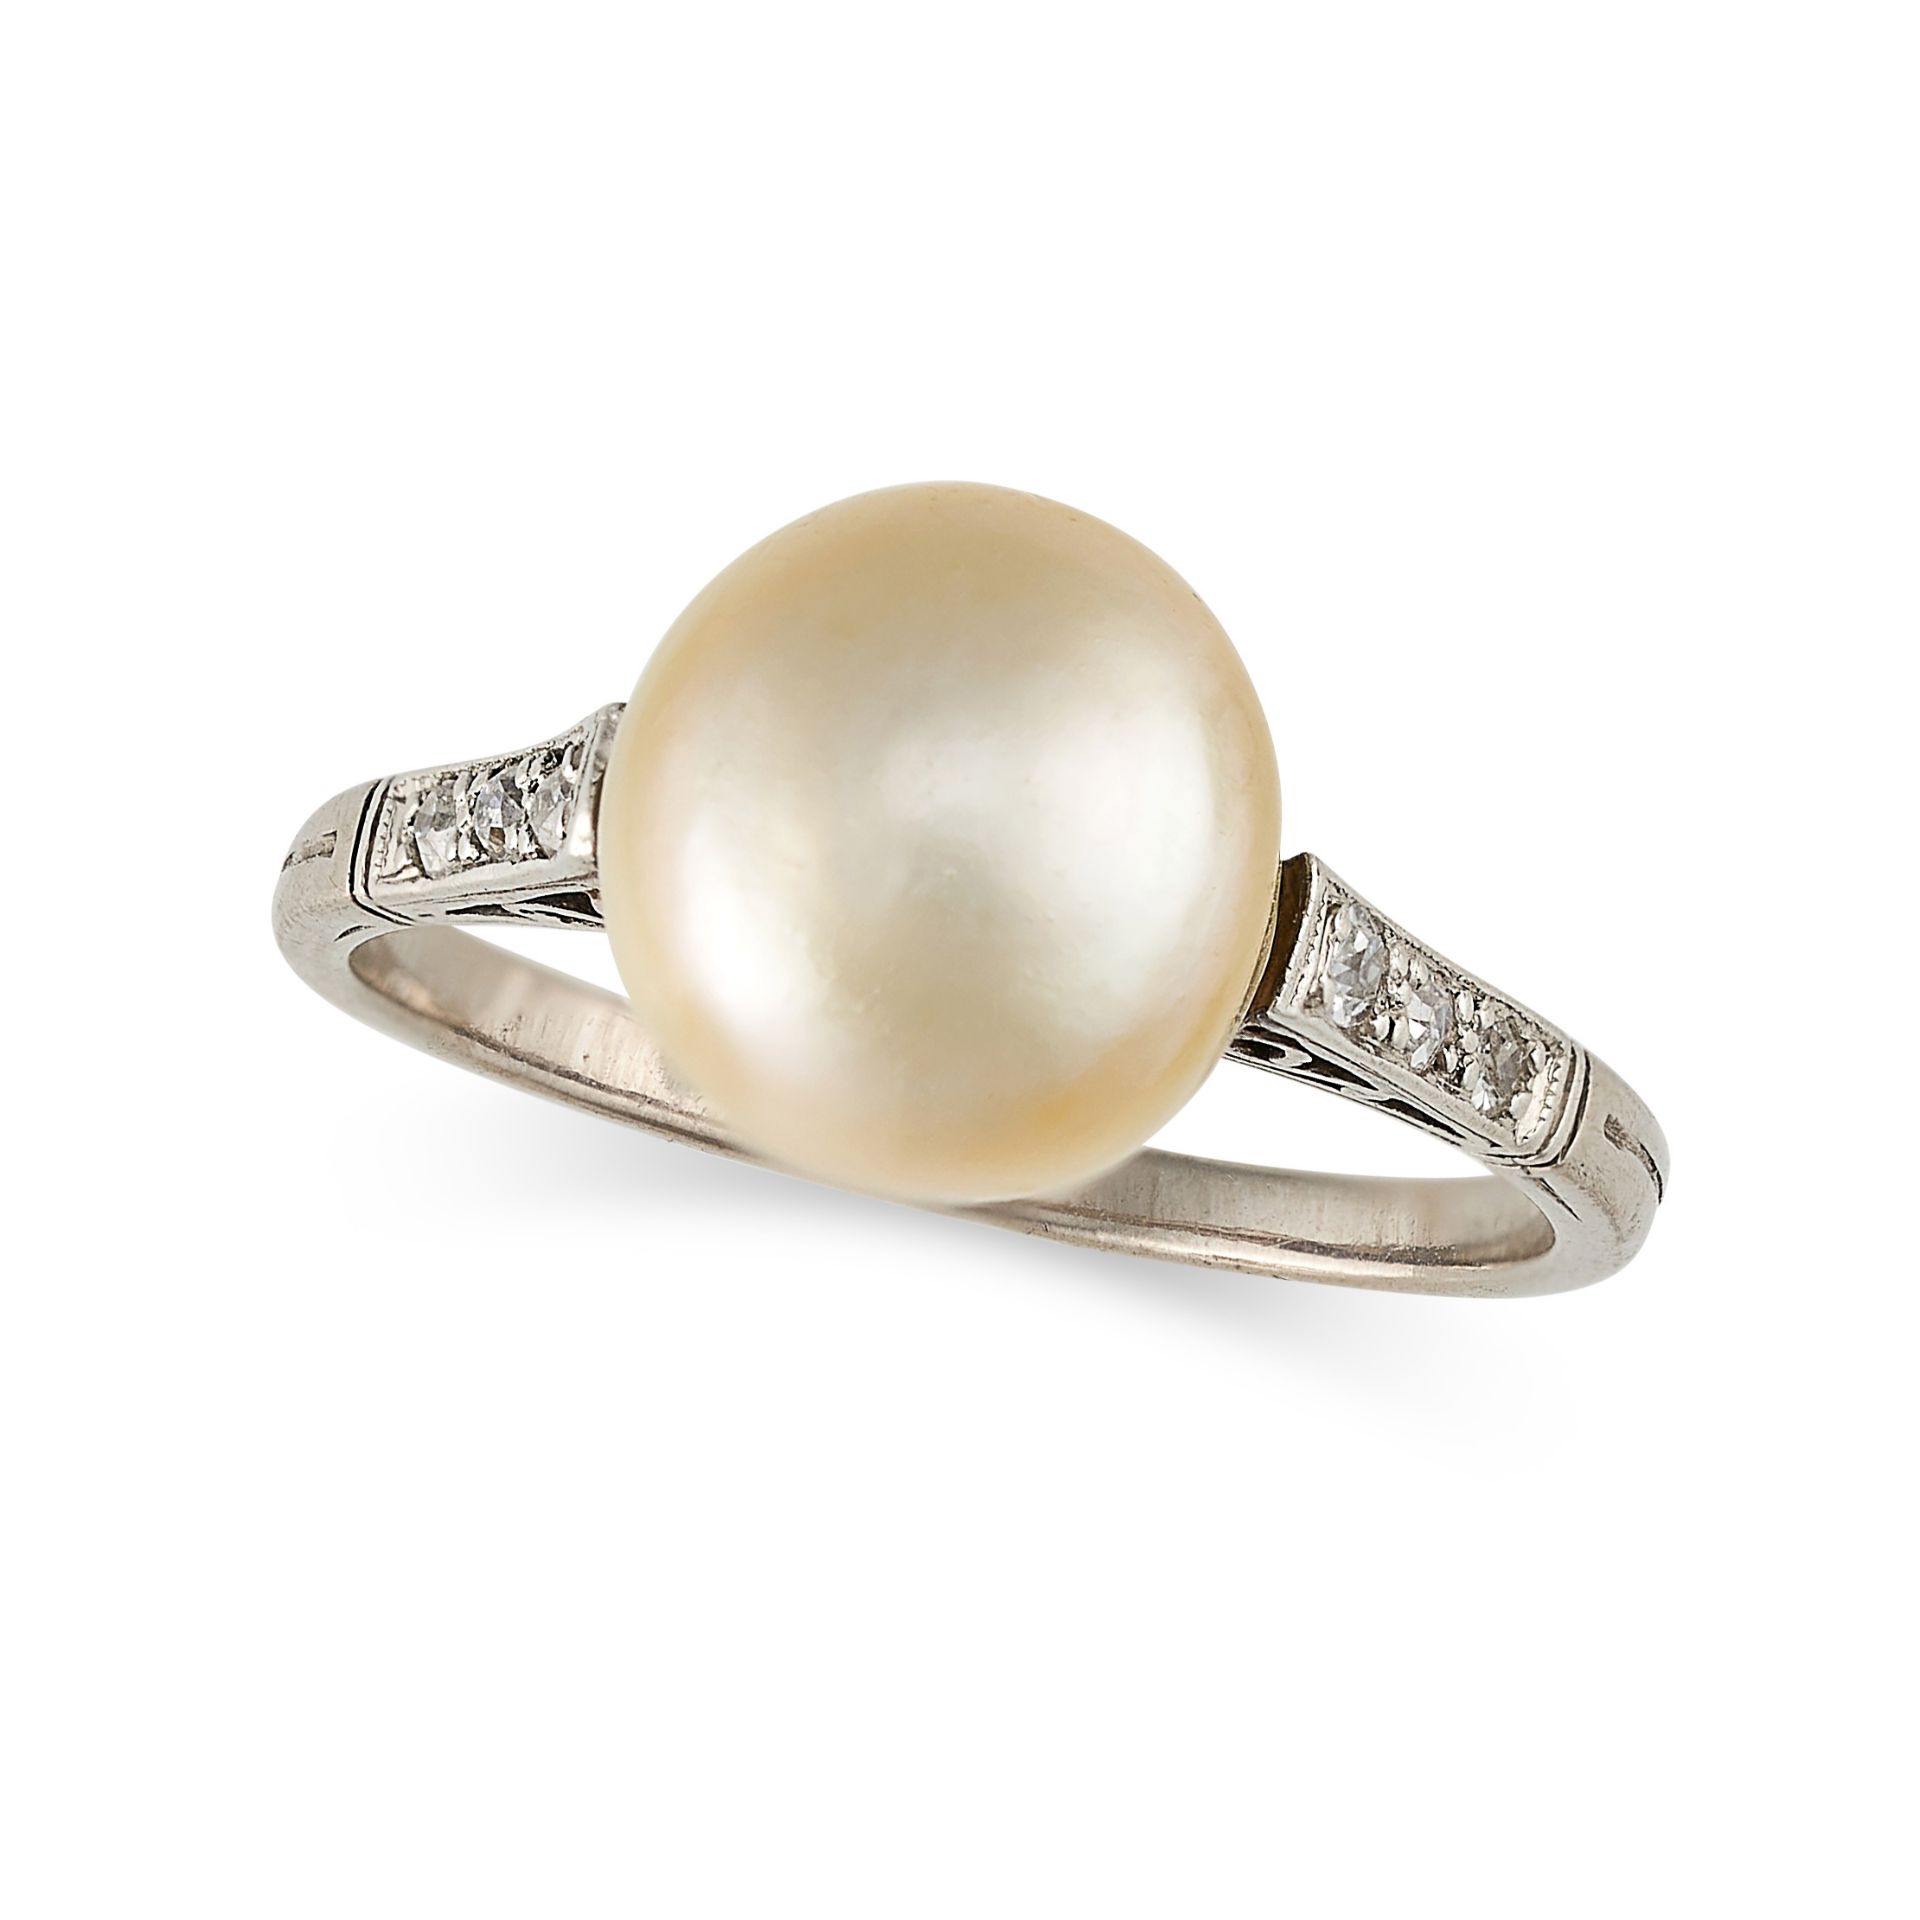 A NATURAL SALTWATER PEARL AND DIAMOND RING set with a natural saltwater pearl of 9.5mm, the band